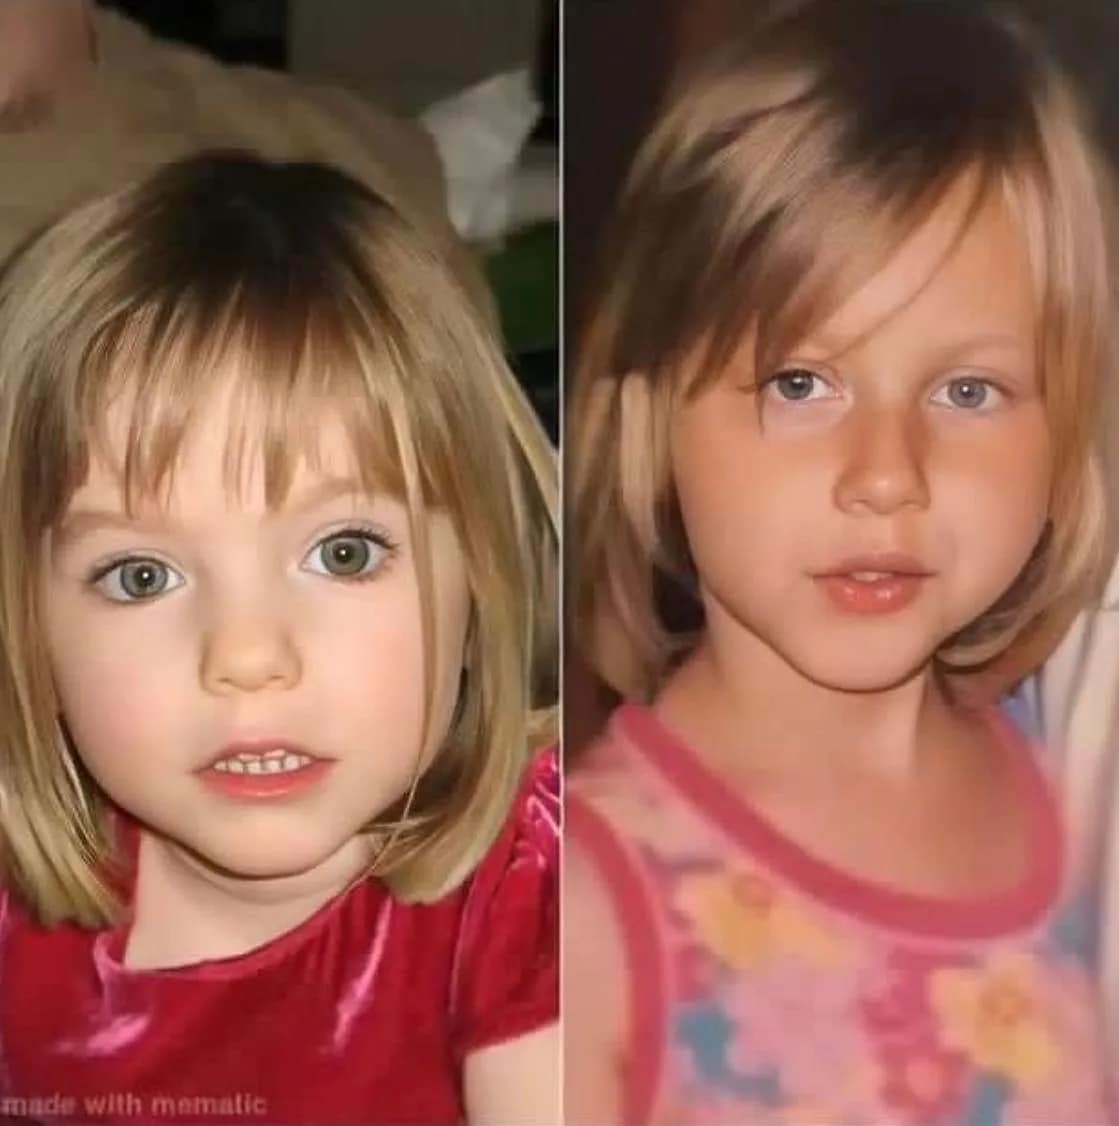 Ms Wendell’s (pictured right) family have refuted claims that she is Madeleine (pictured left).